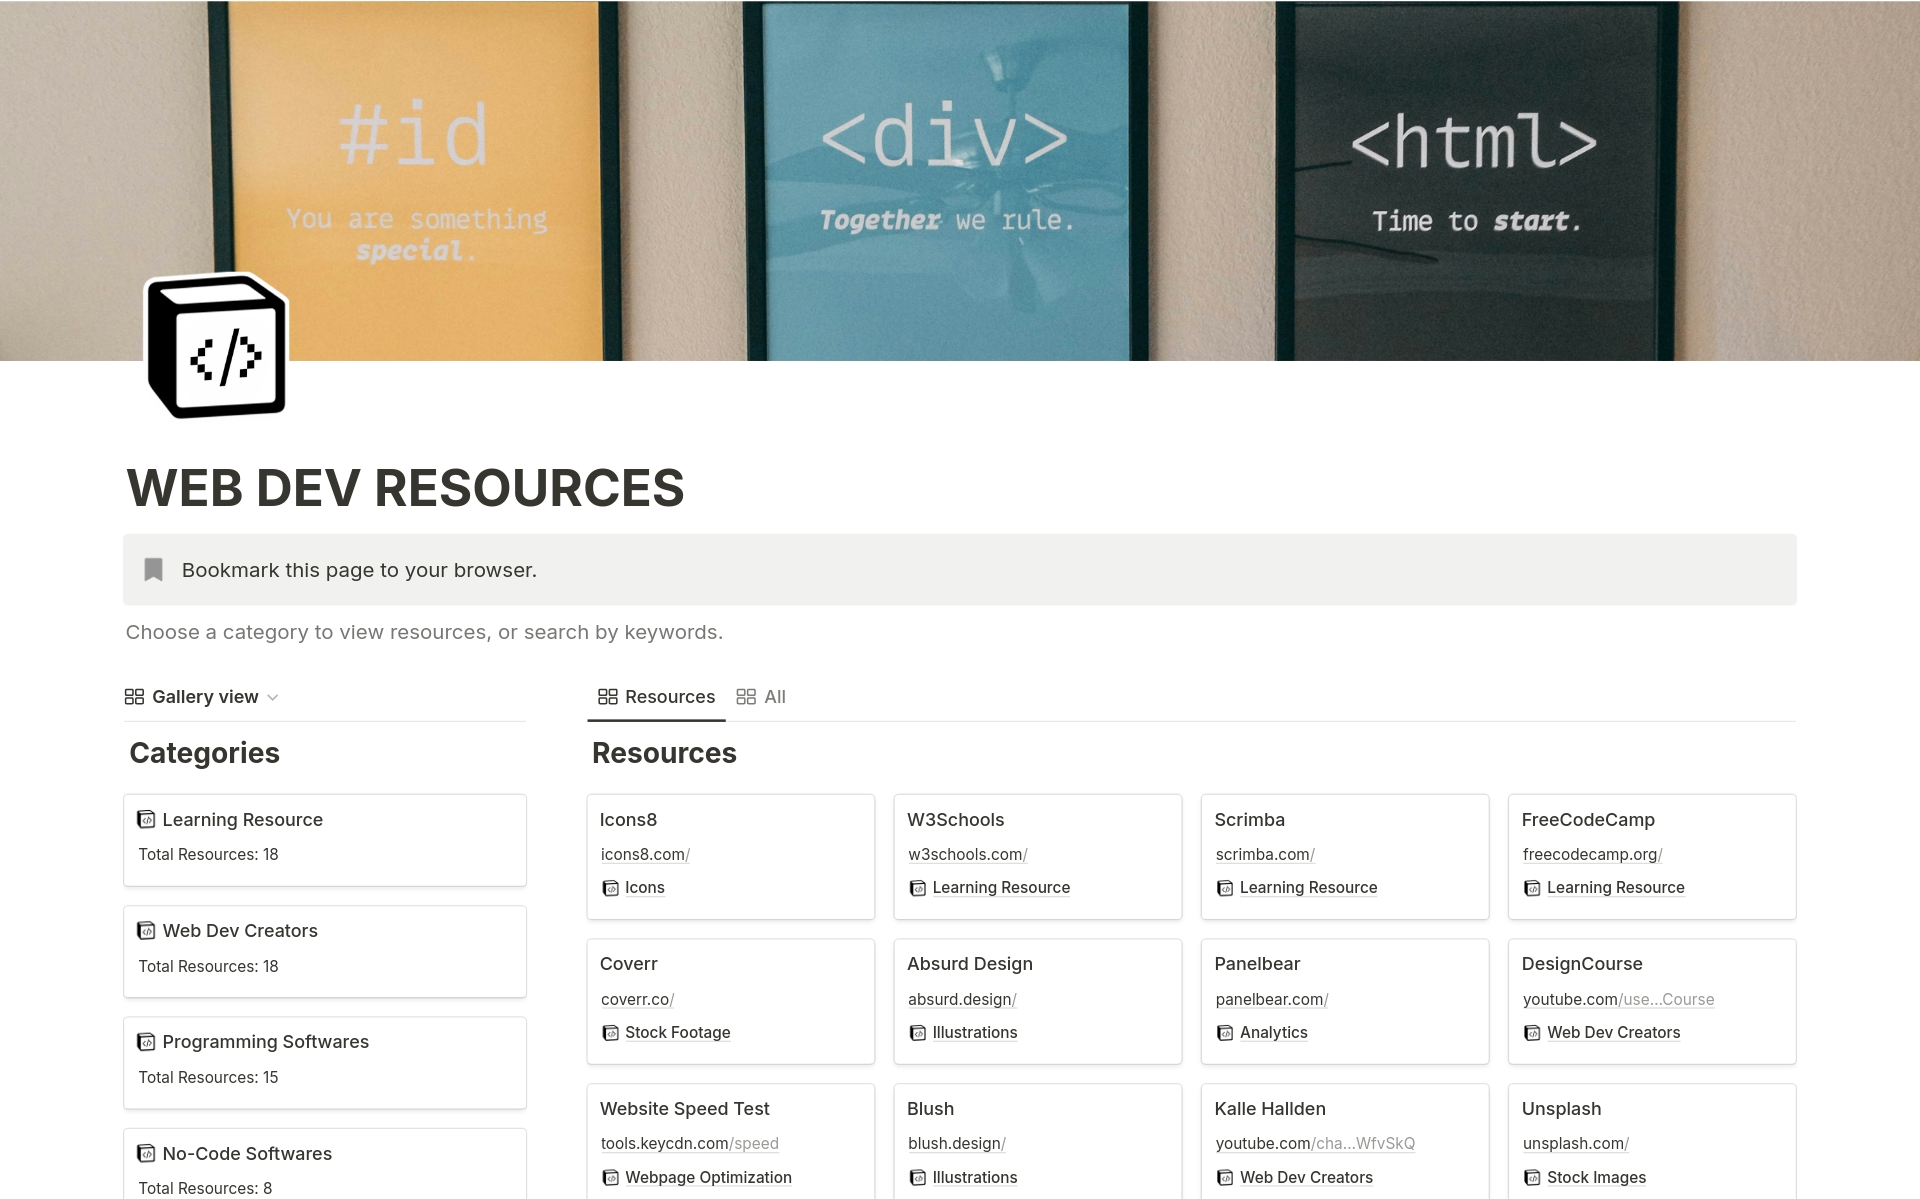 A curated database of over 100+ resources that can help any developer.